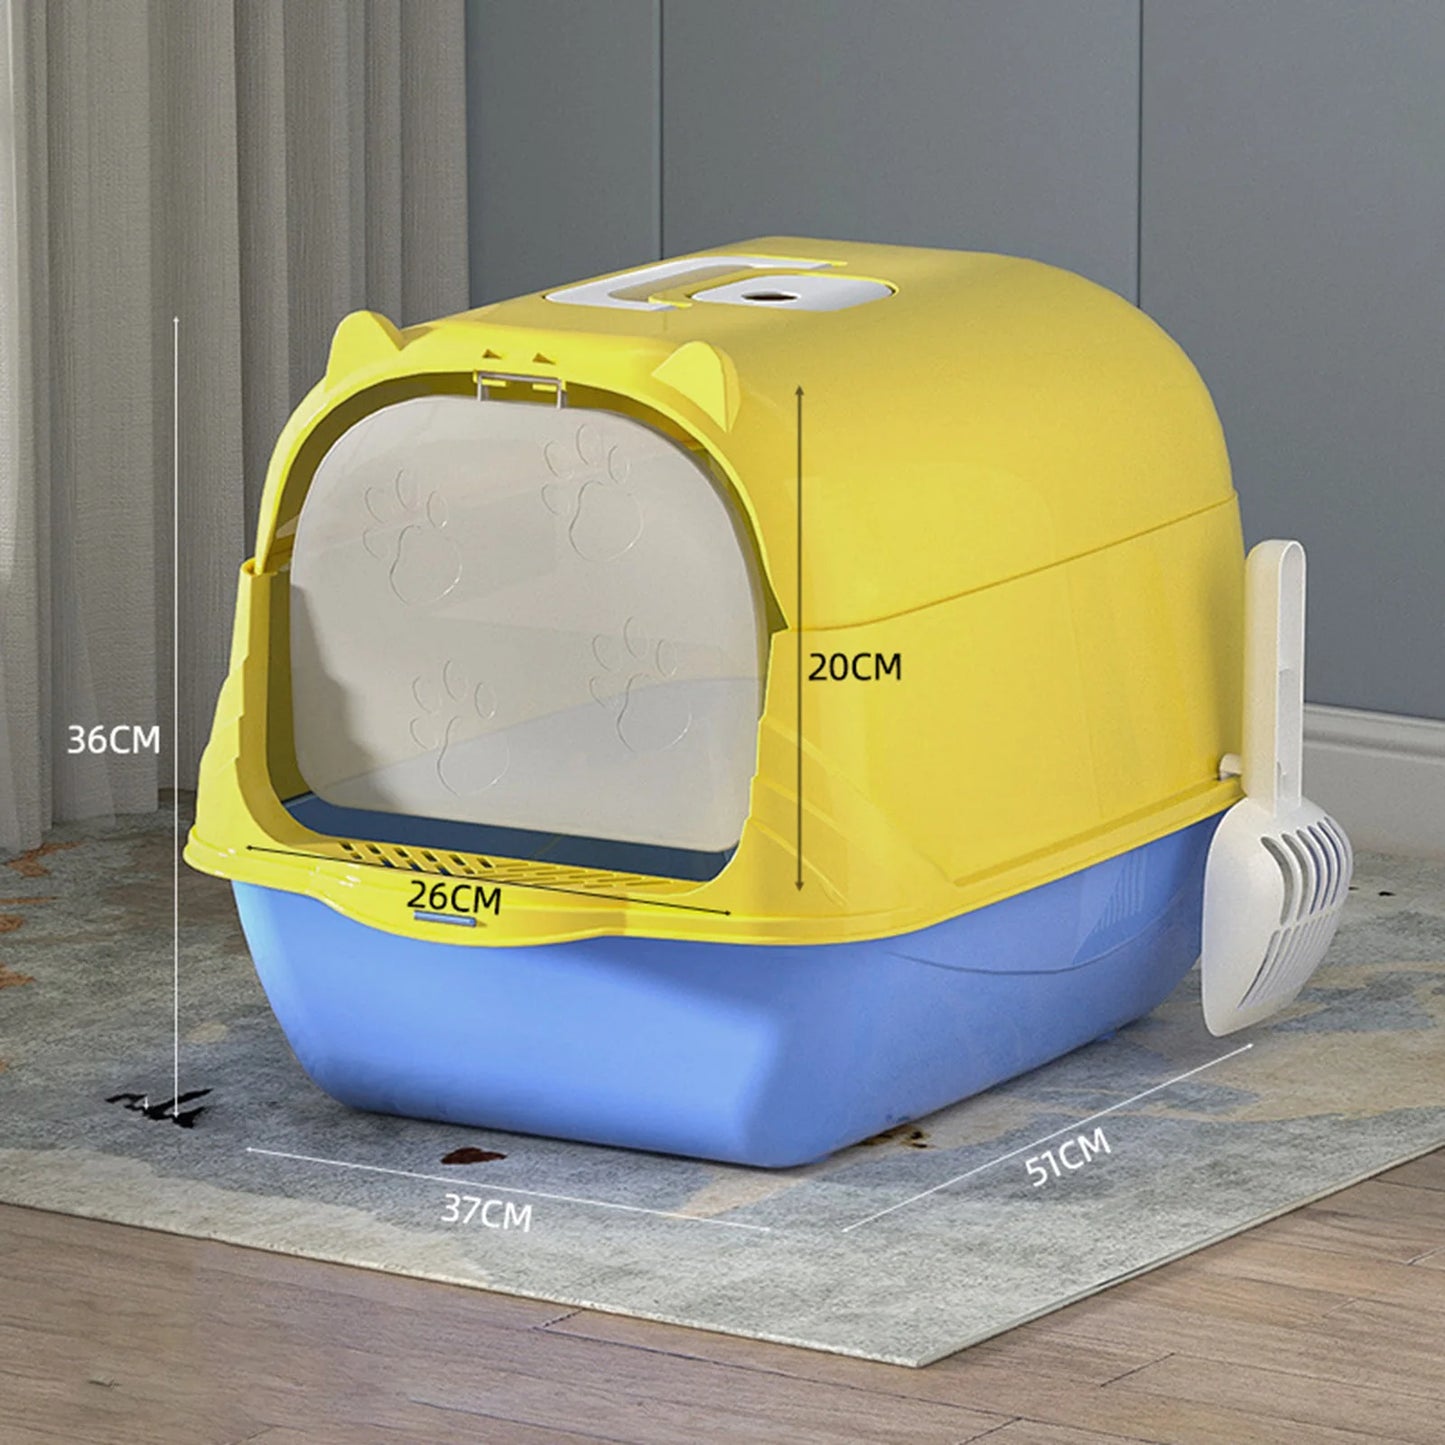 Hooded Cat Litter Box with Scoop Container Durable Kitty Litter Tray with Front Door Pan Bedpan Fully Enclosed Cat Toilet